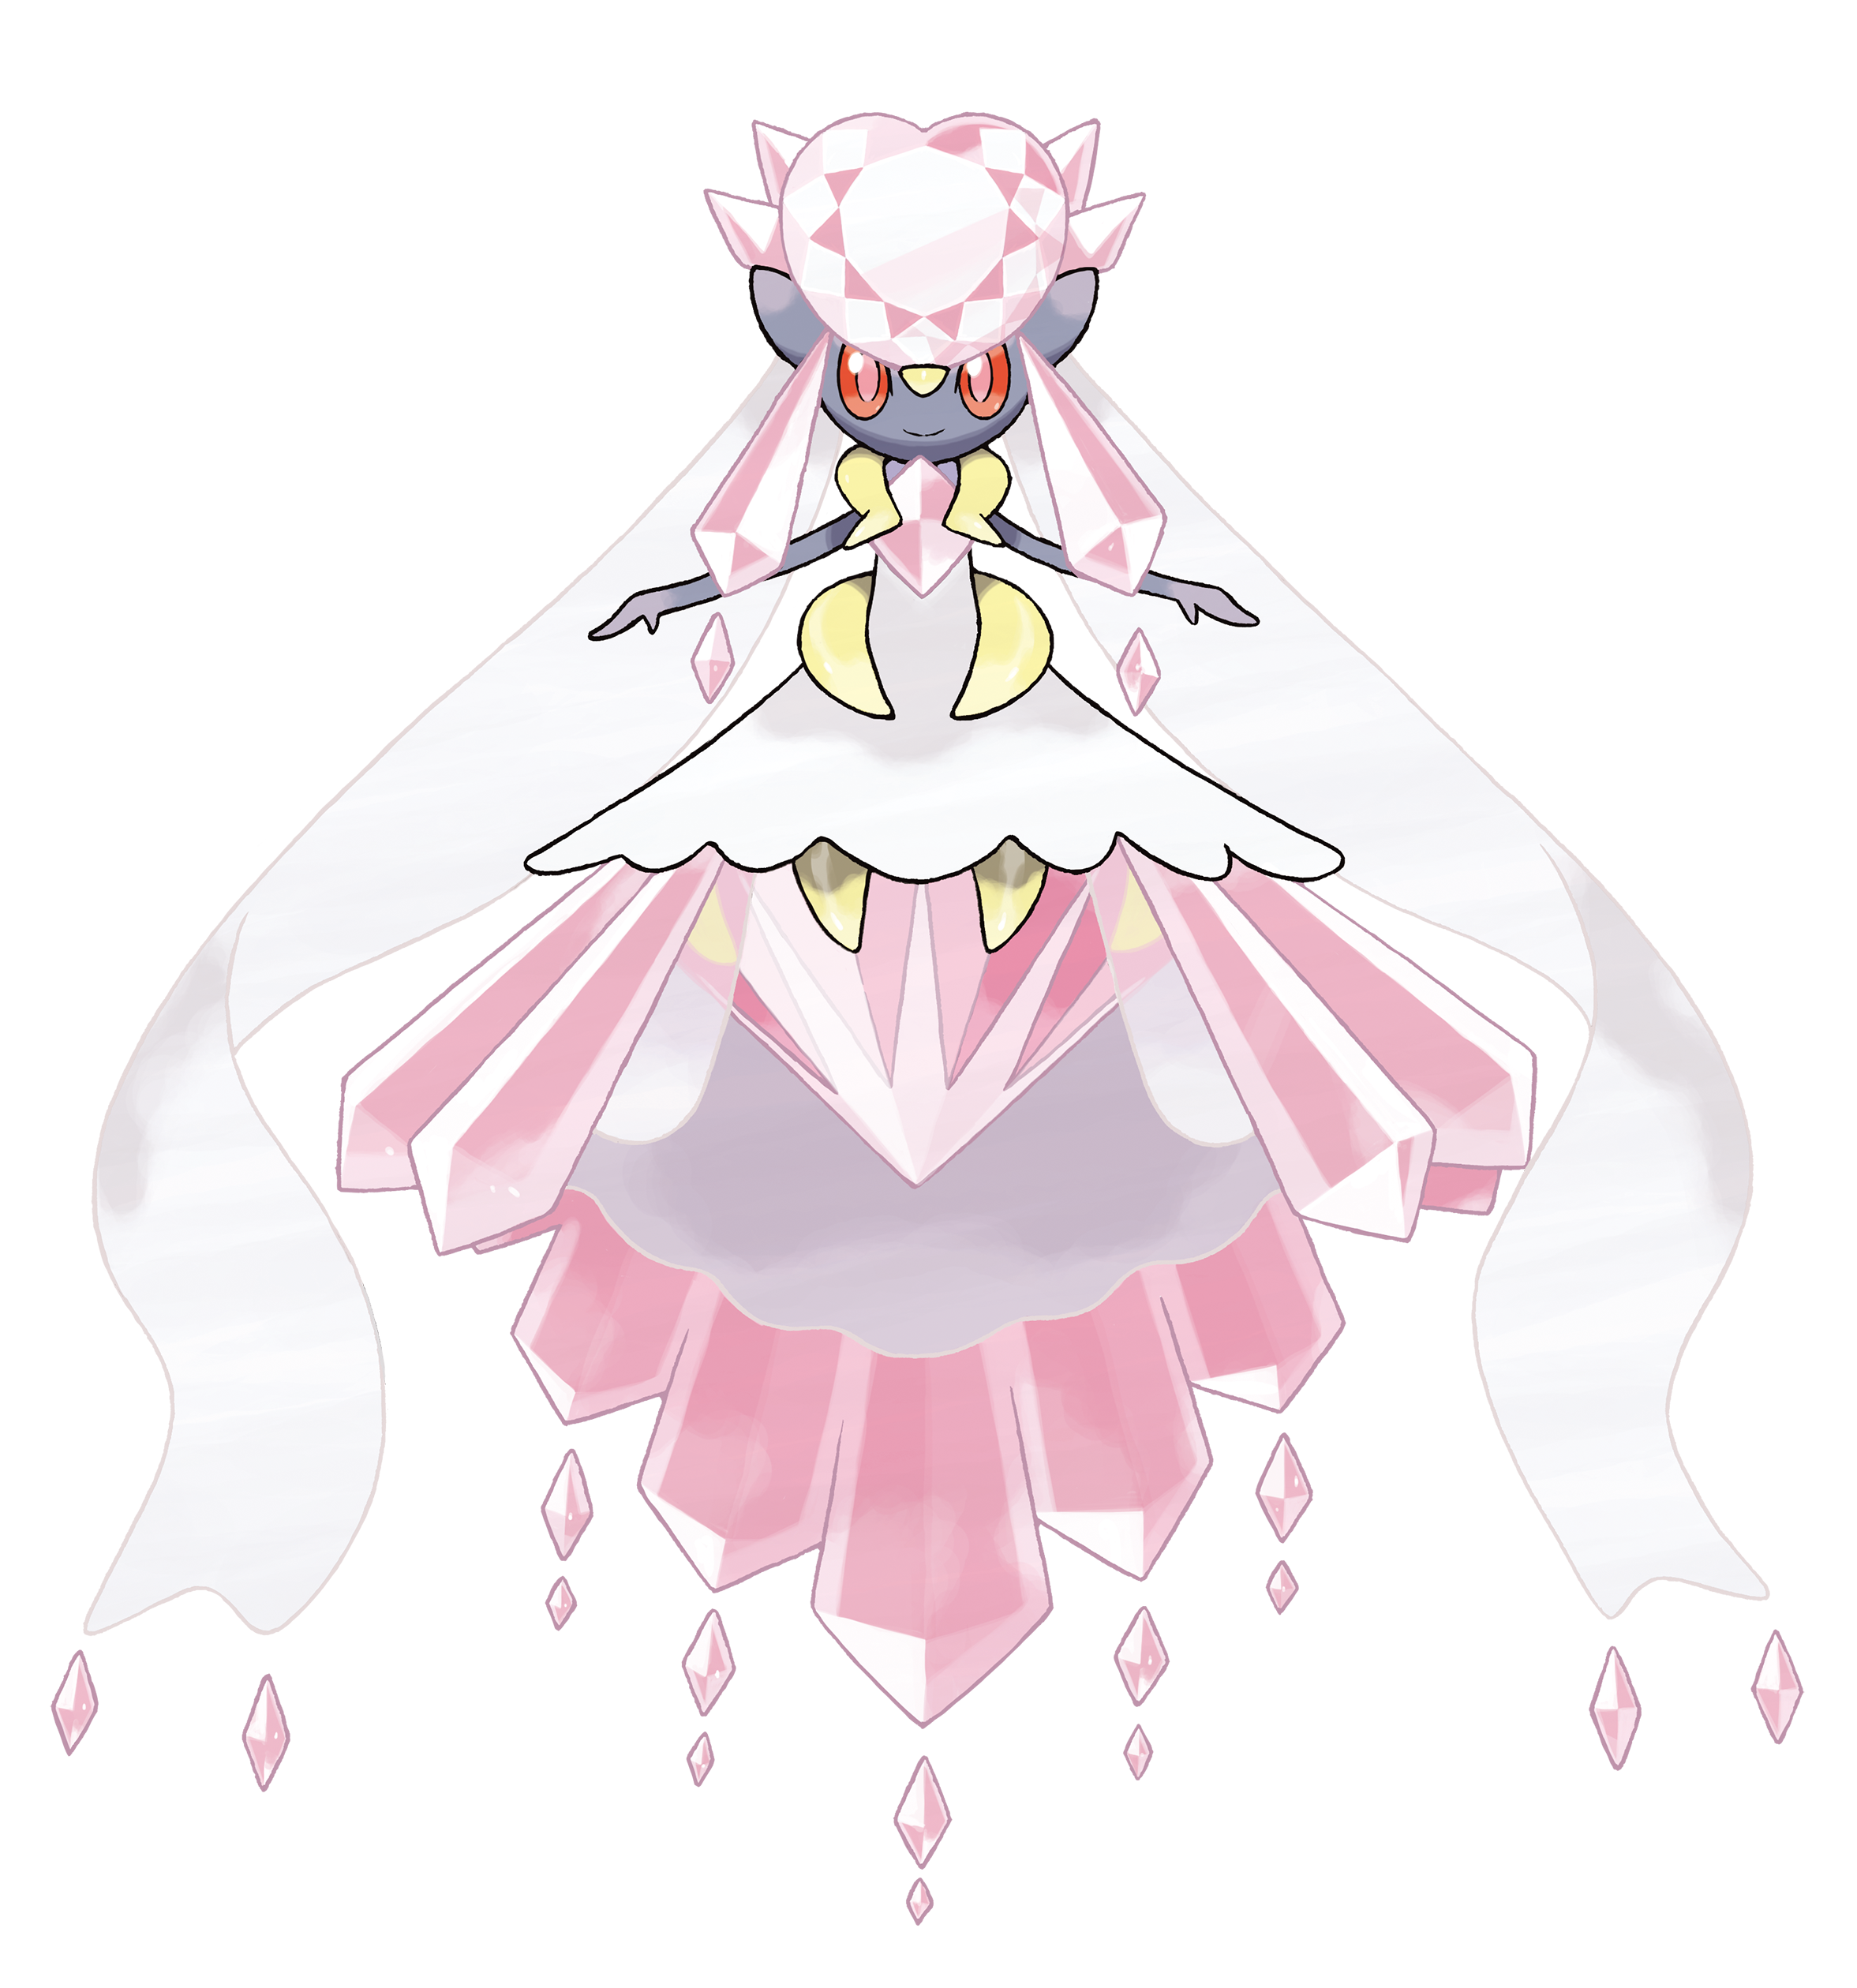 Diancie Hd Wallpapers